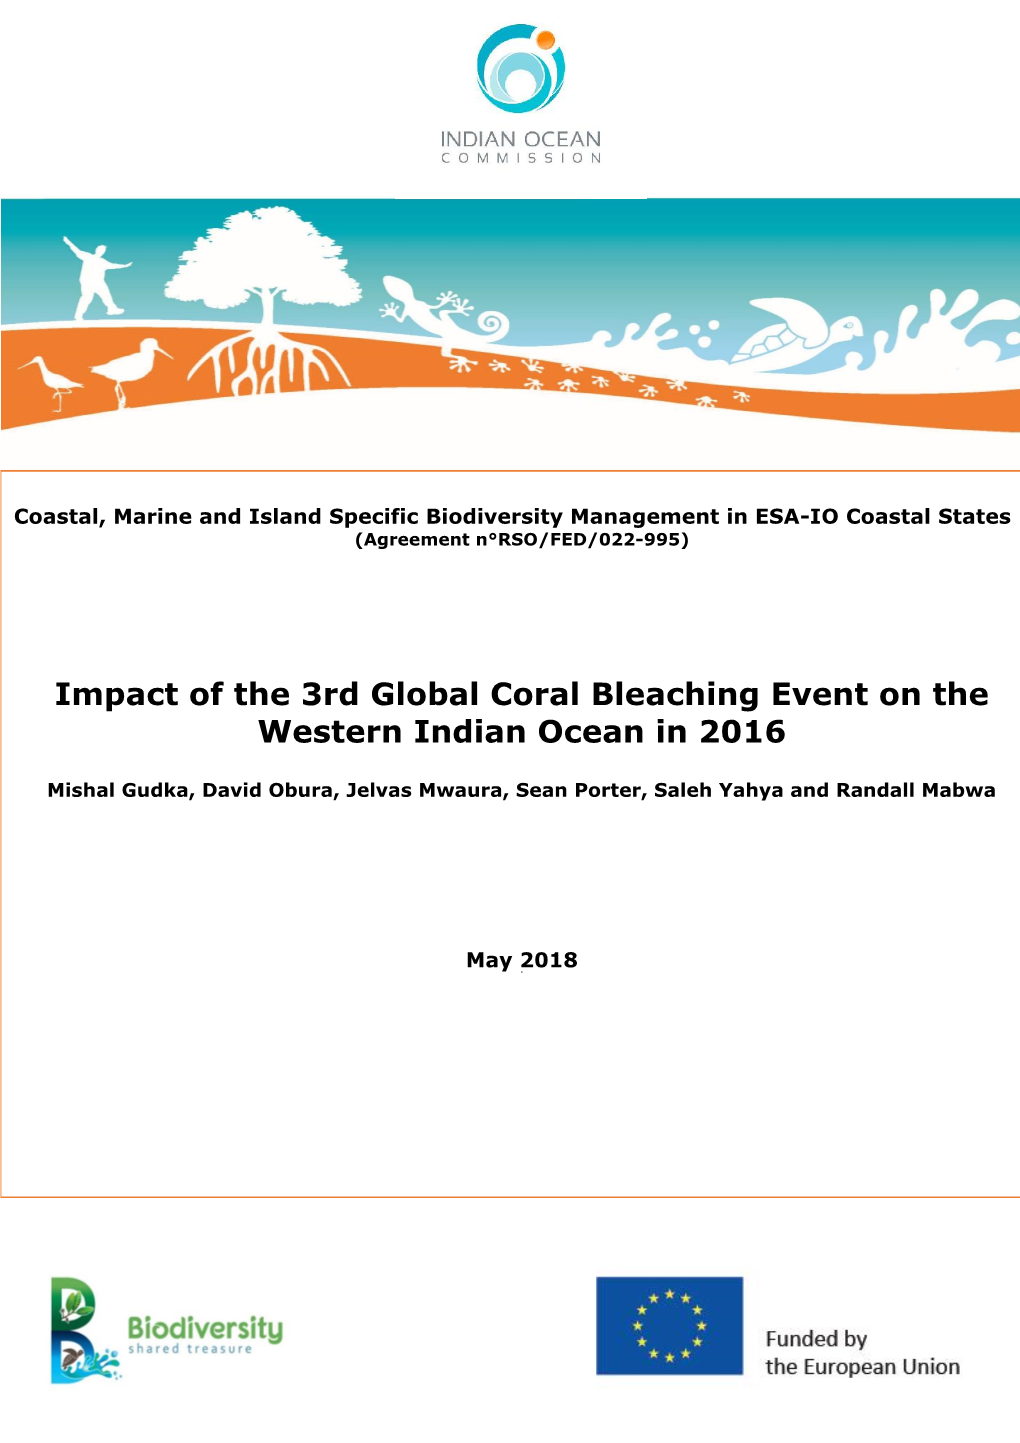 Impact of the 3Rd Global Coral Bleaching Event on the Western Indian Ocean in 2016